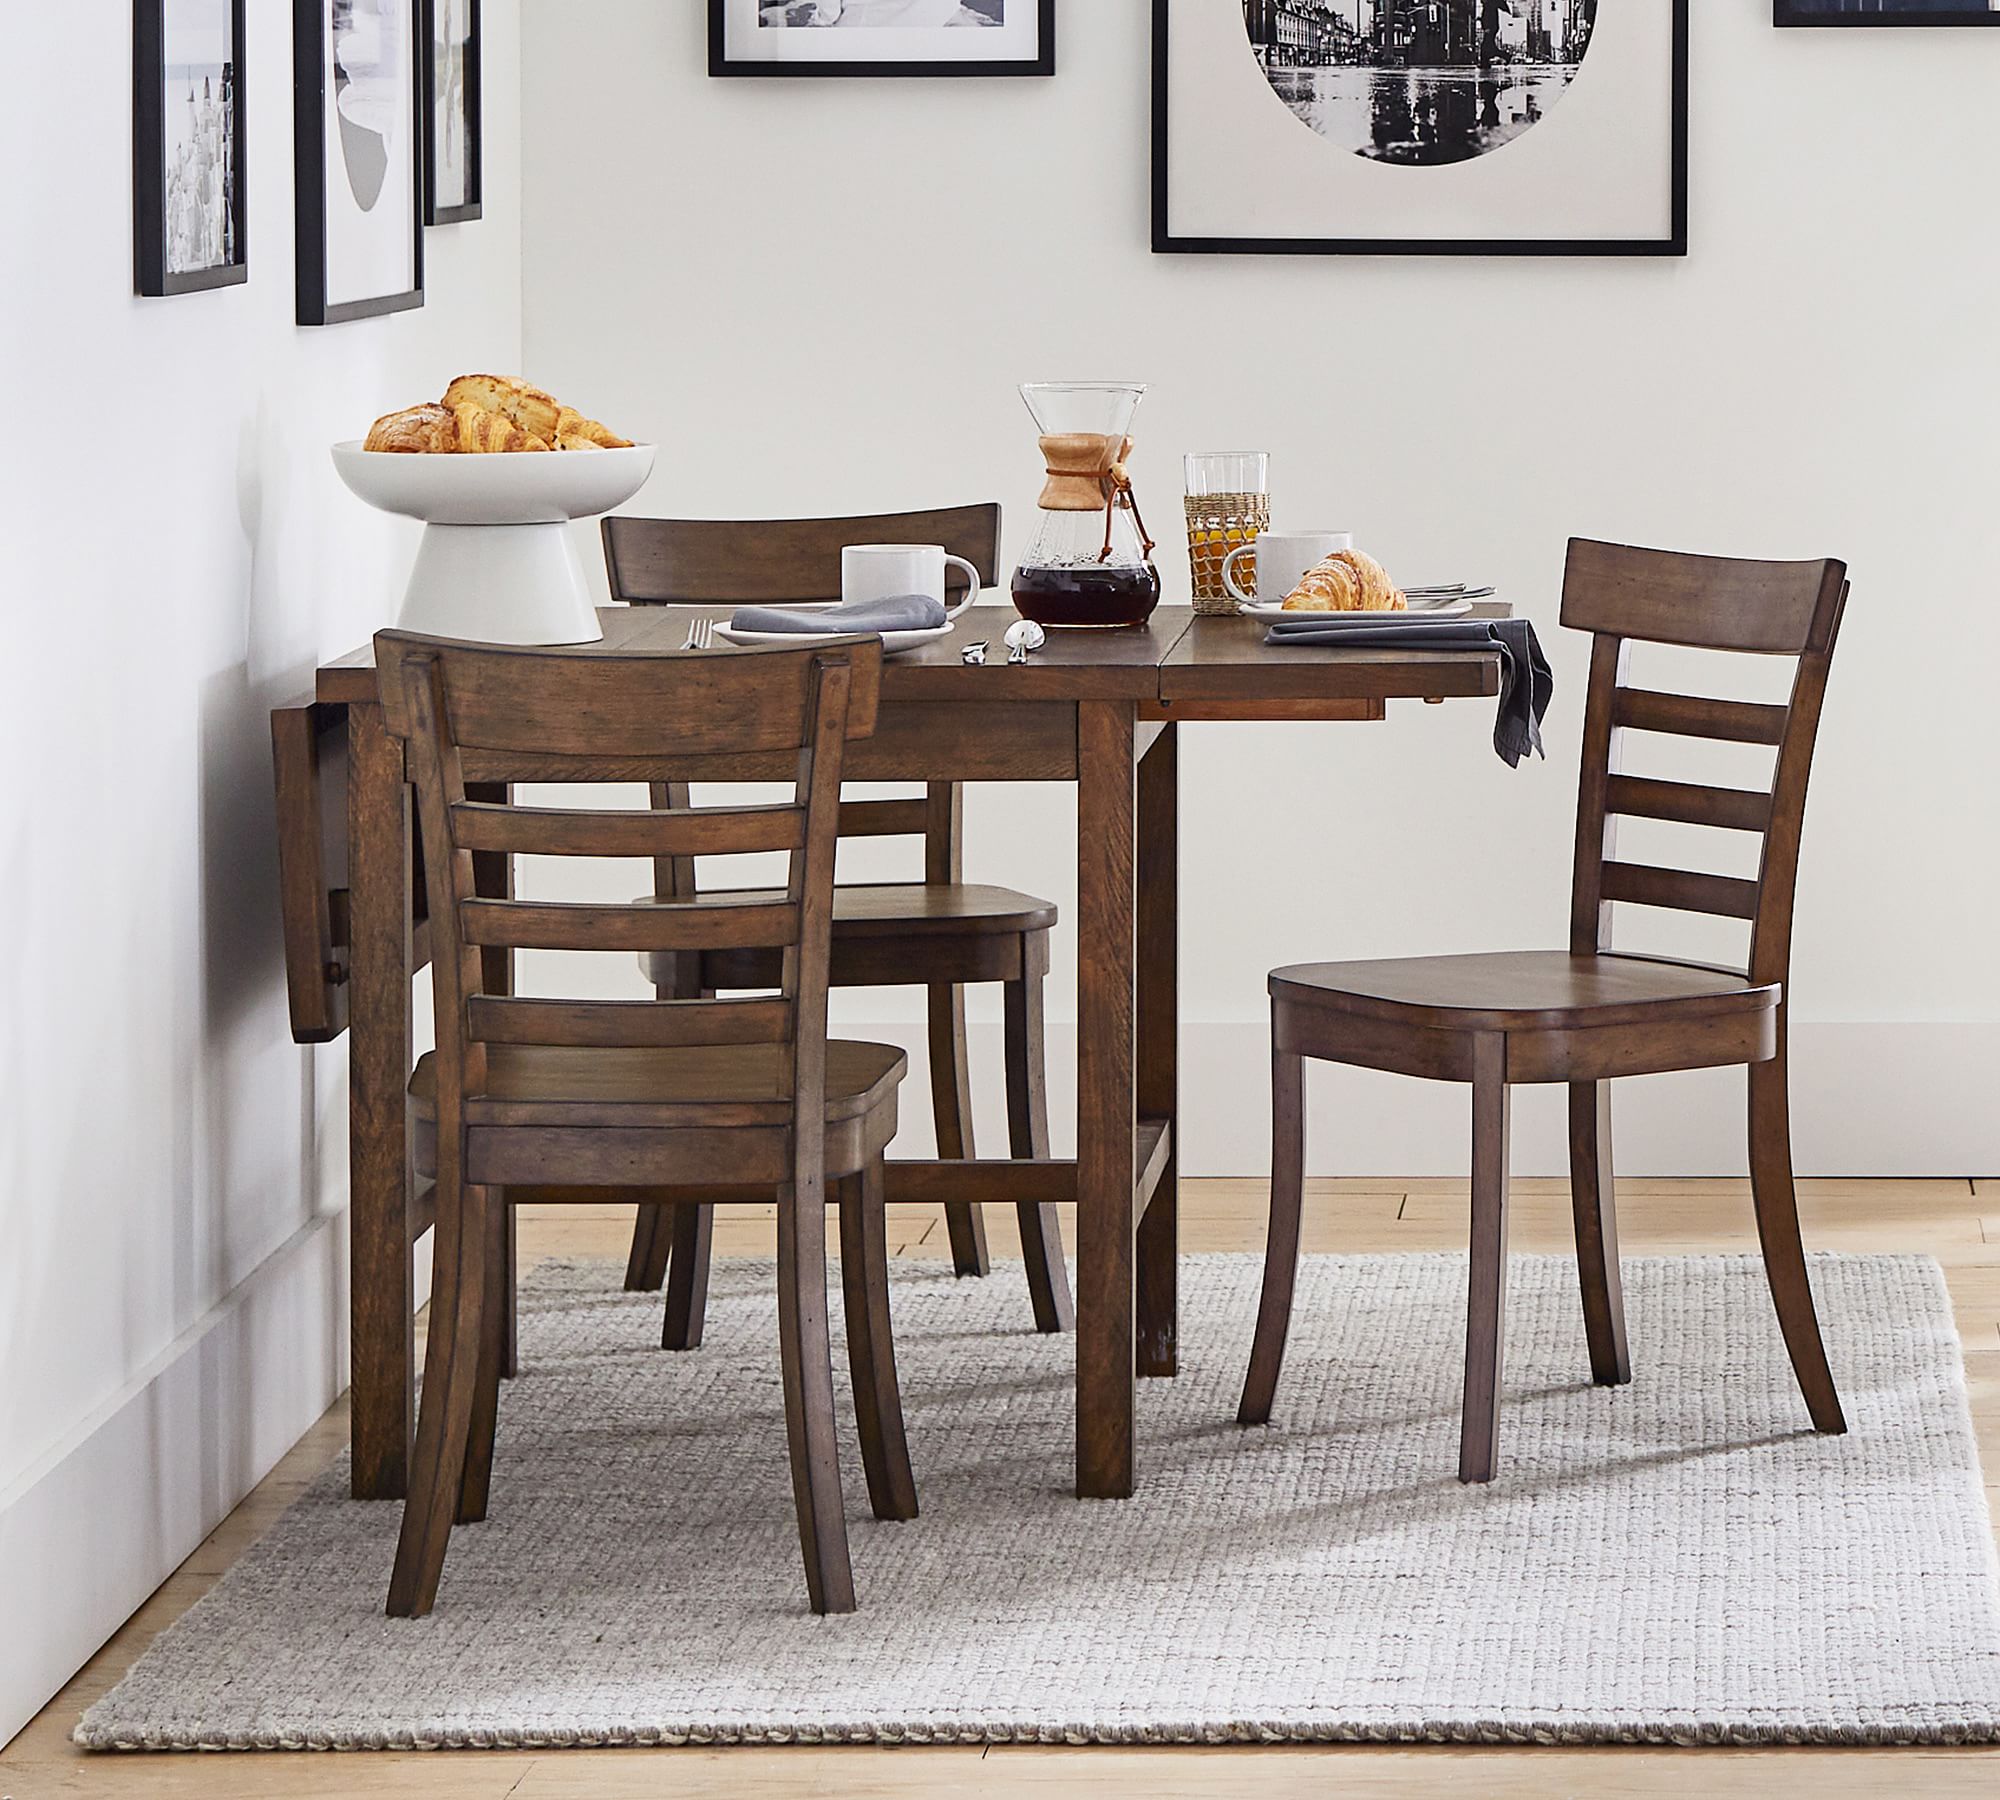 Mateo Drop Leaf Dining Table (30"- 54")